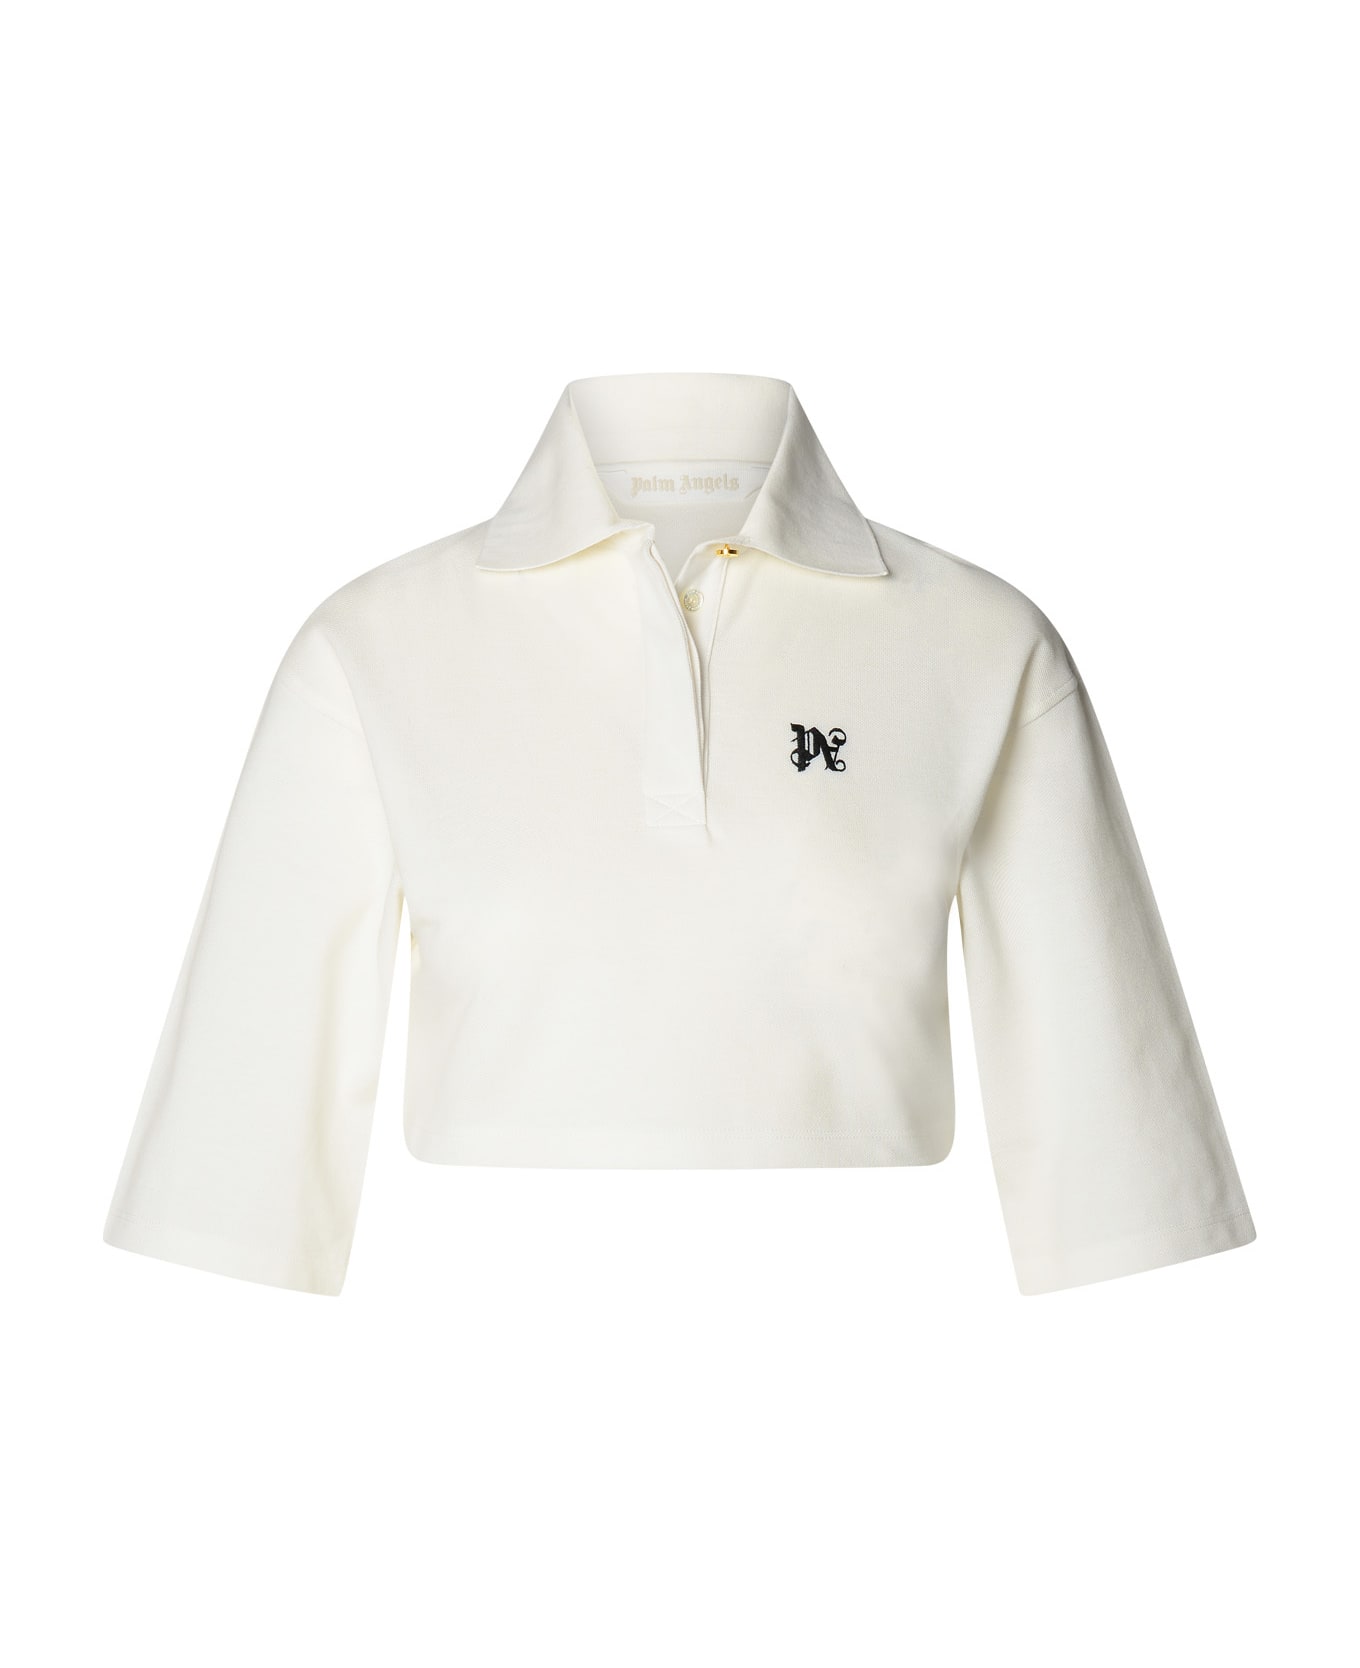 Palm Angels White Cotton Crop Polo Shirt - OFF WHITE